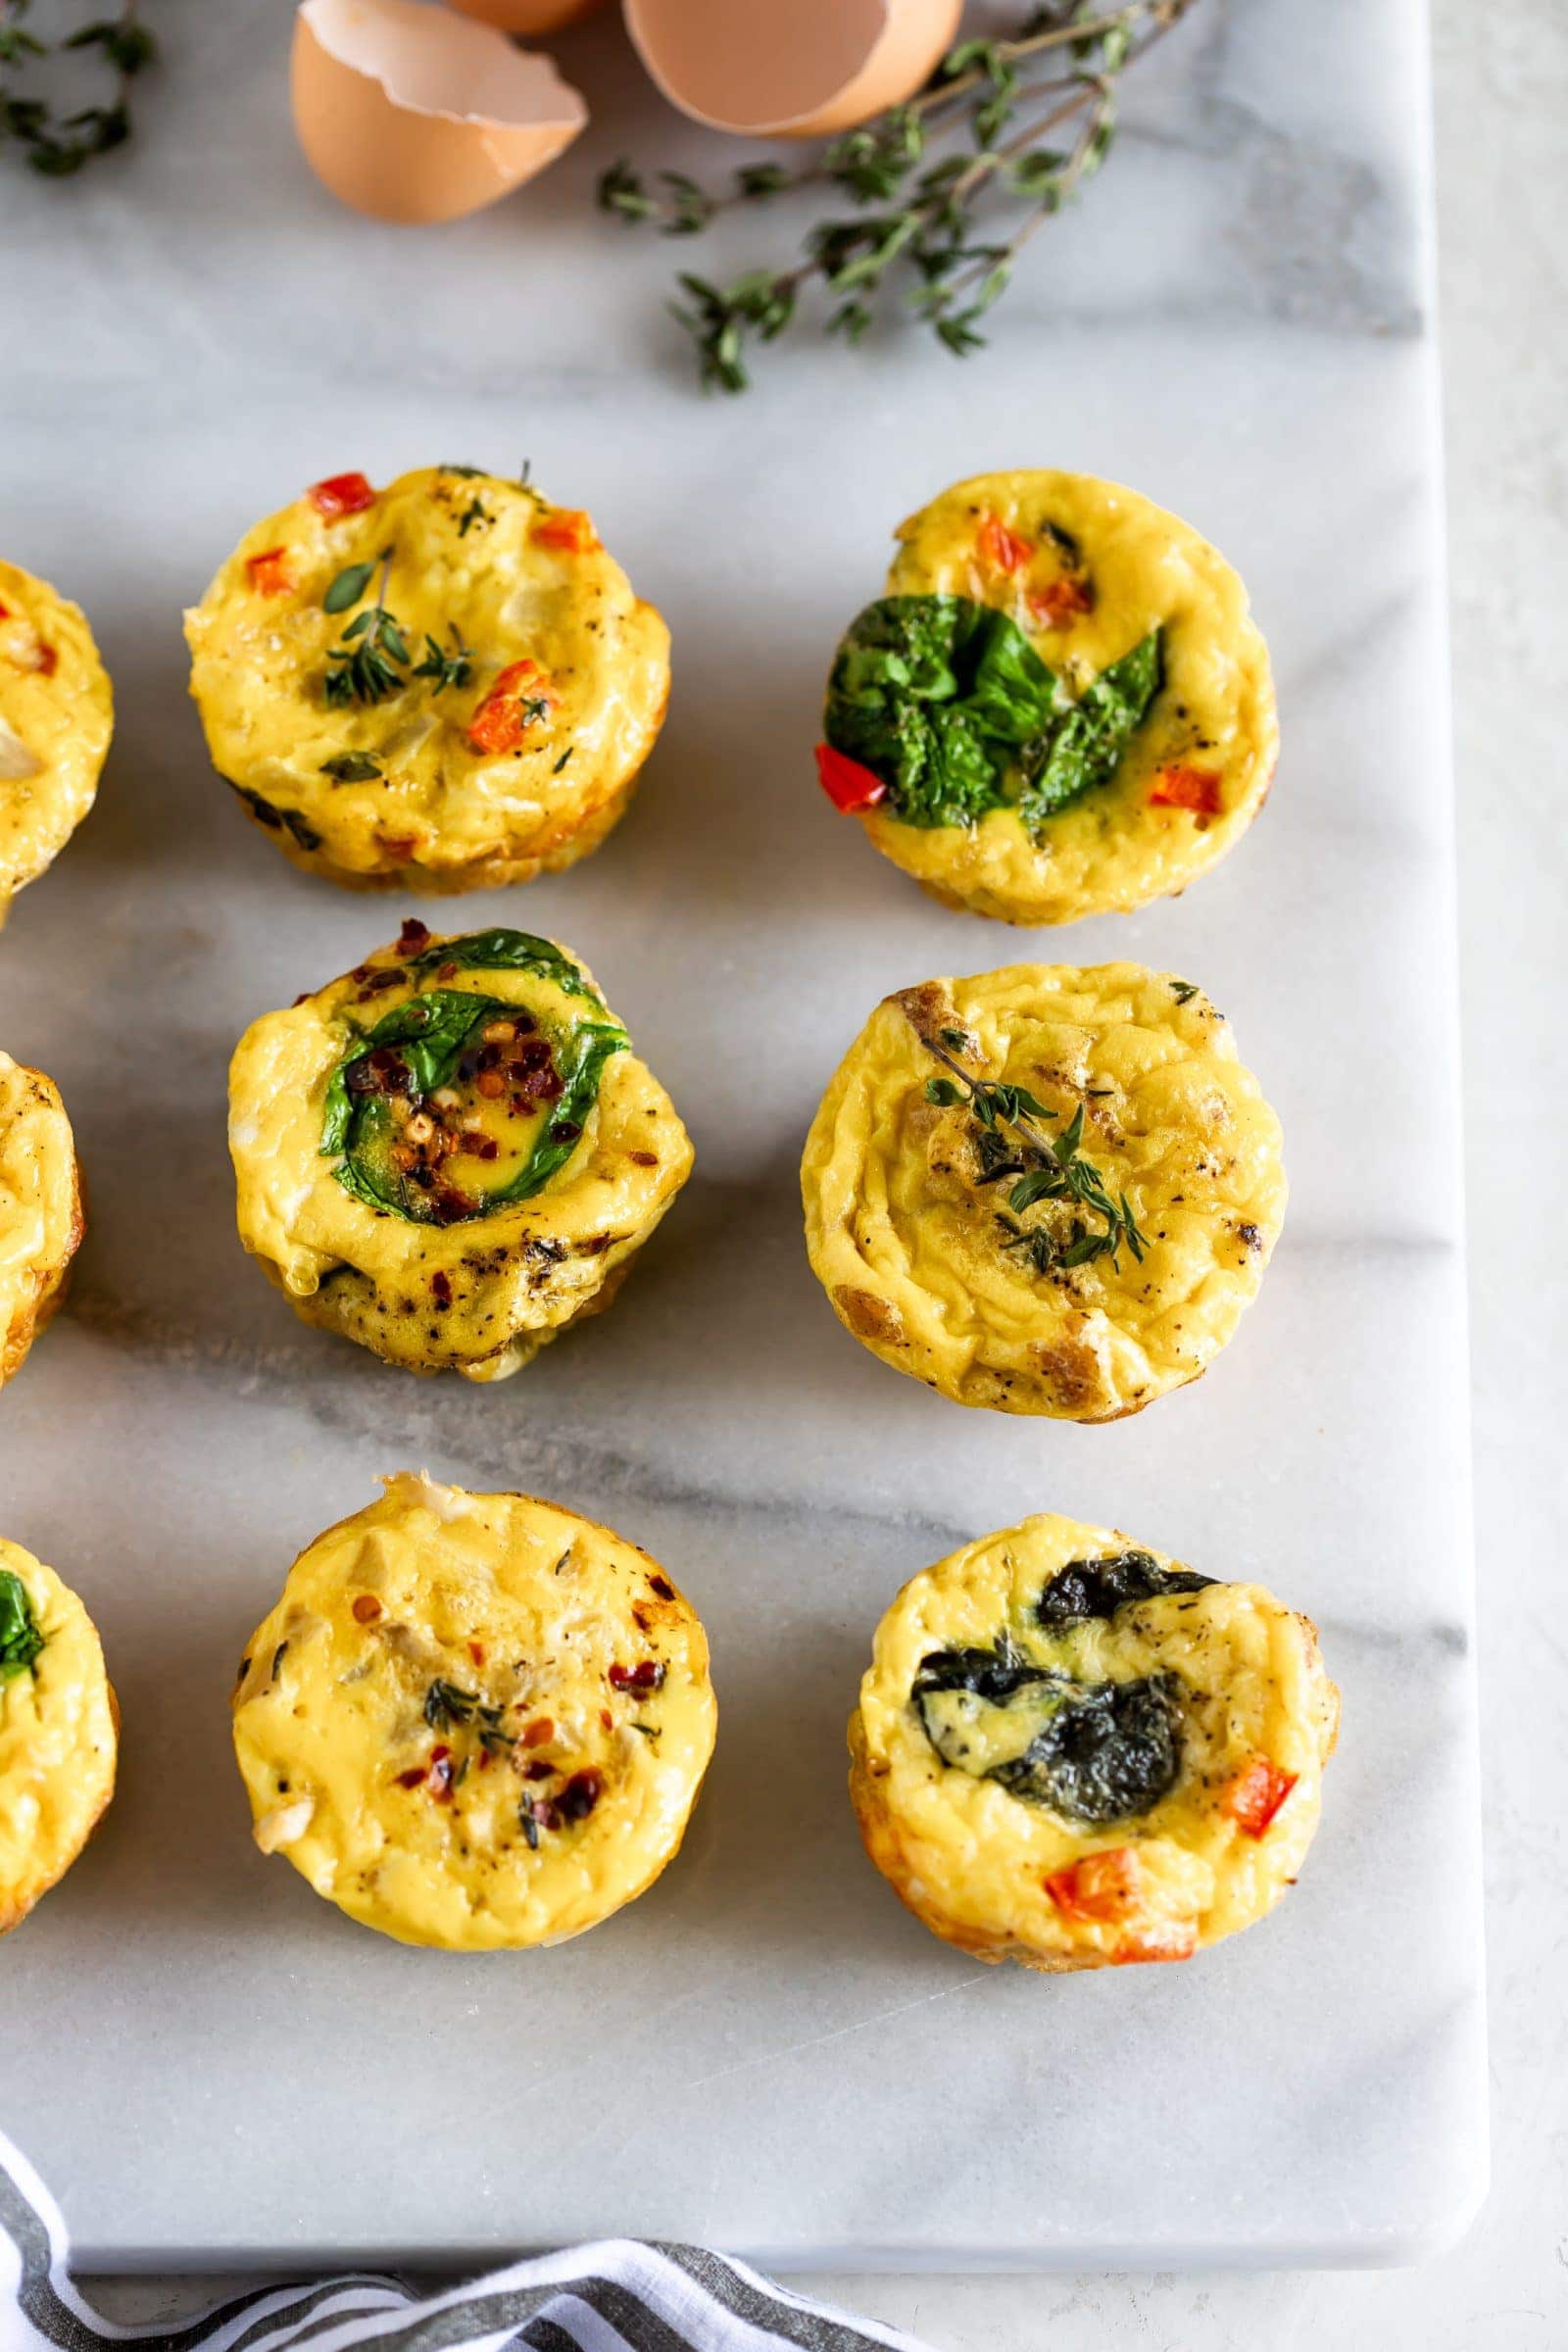 https://asassyspoon.com/wp-content/uploads/healthy-egg-muffin-cups-frittatas-meal-prep-3.jpg